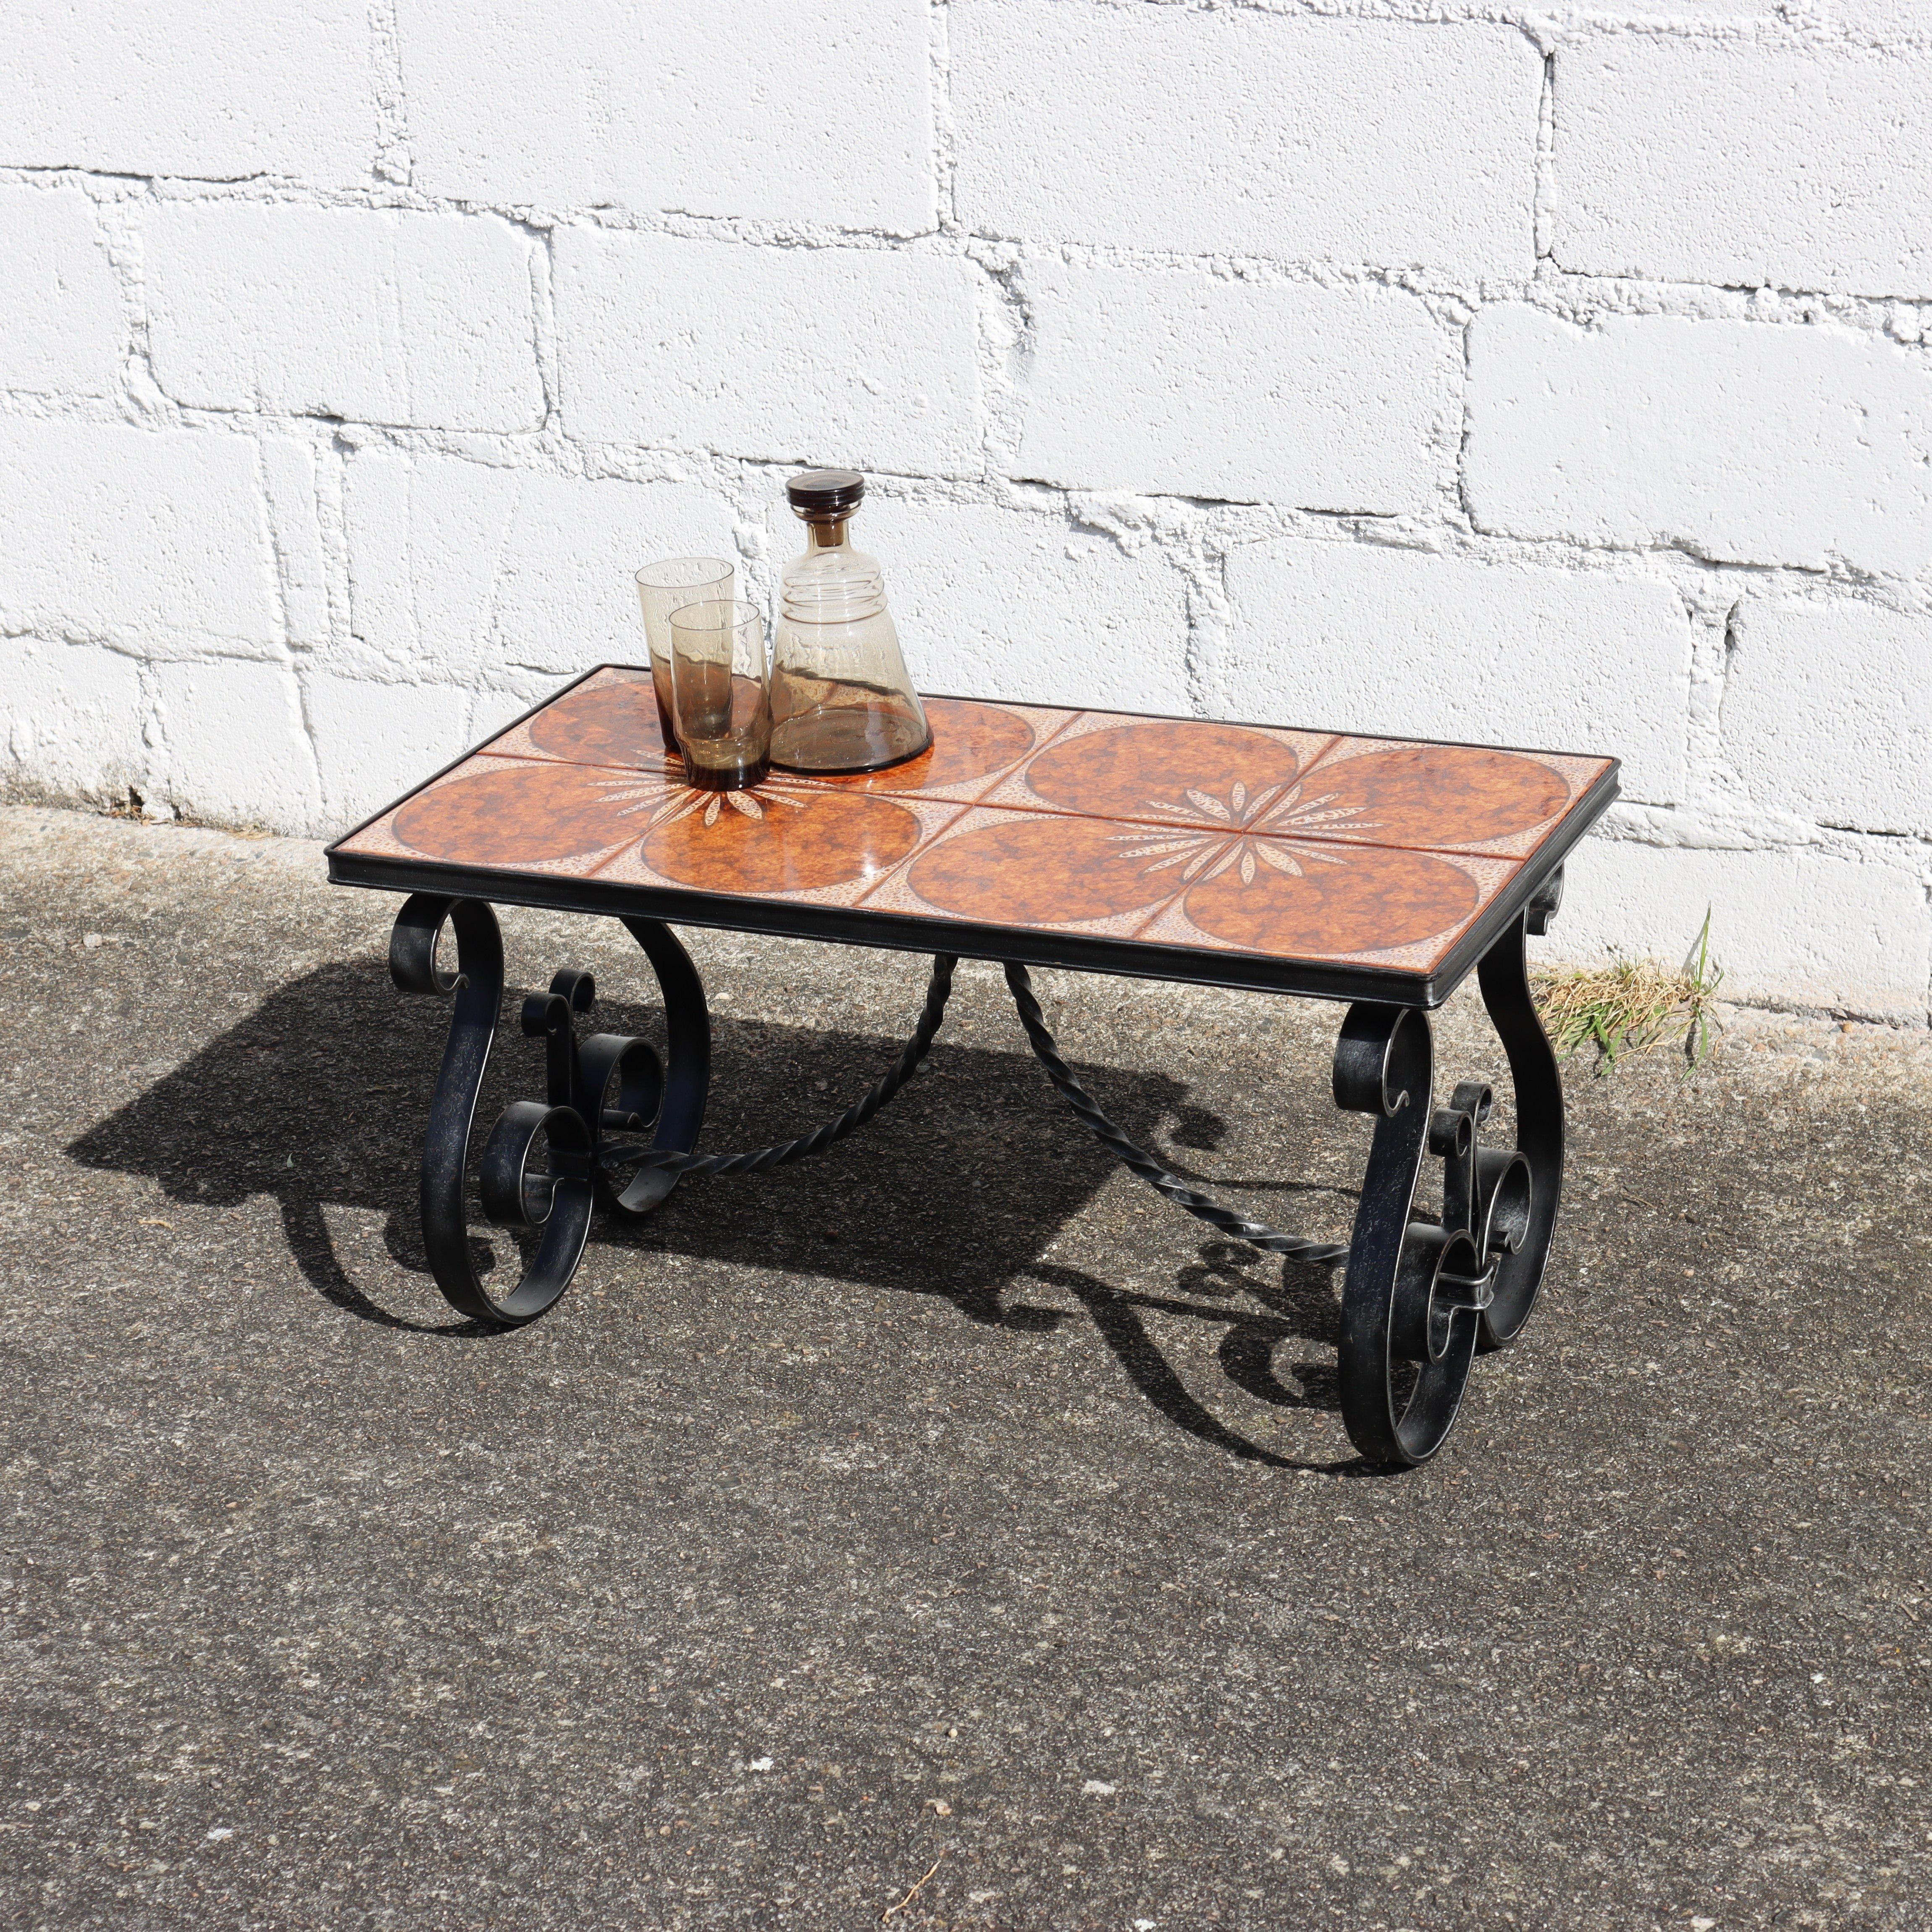 European Vintage Forged Iron and Ceramic Coffee Table - Cocktail Table - Patio Table-60s For Sale